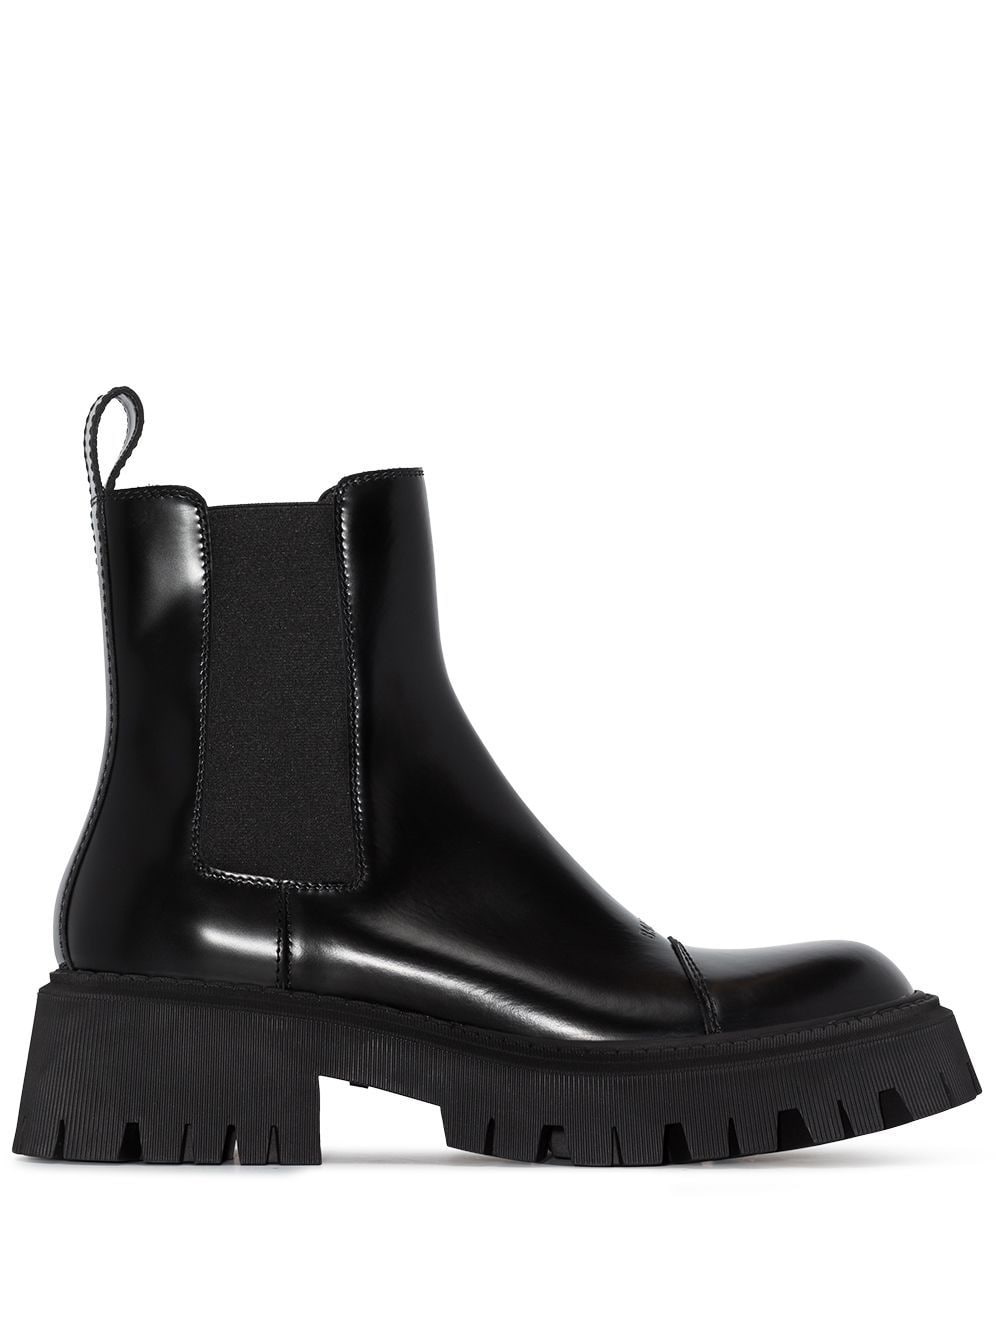 Black leather Tractor Chelsea boots